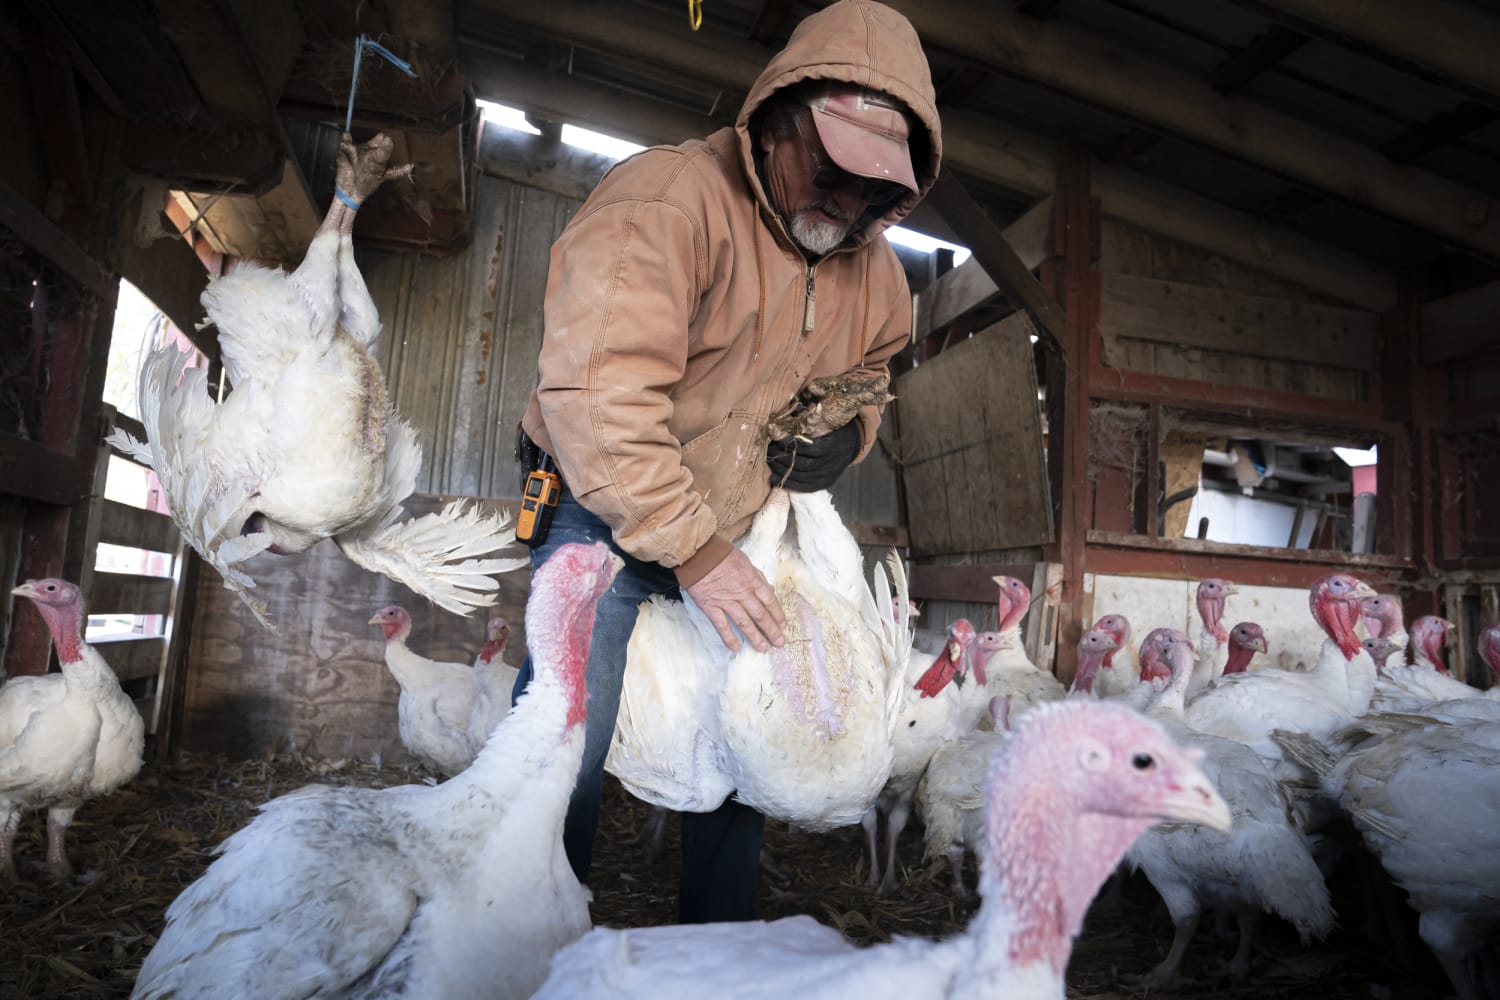 The avian flu is hammering U.S. poultry farmers, leaving experts to ask: What has changed?